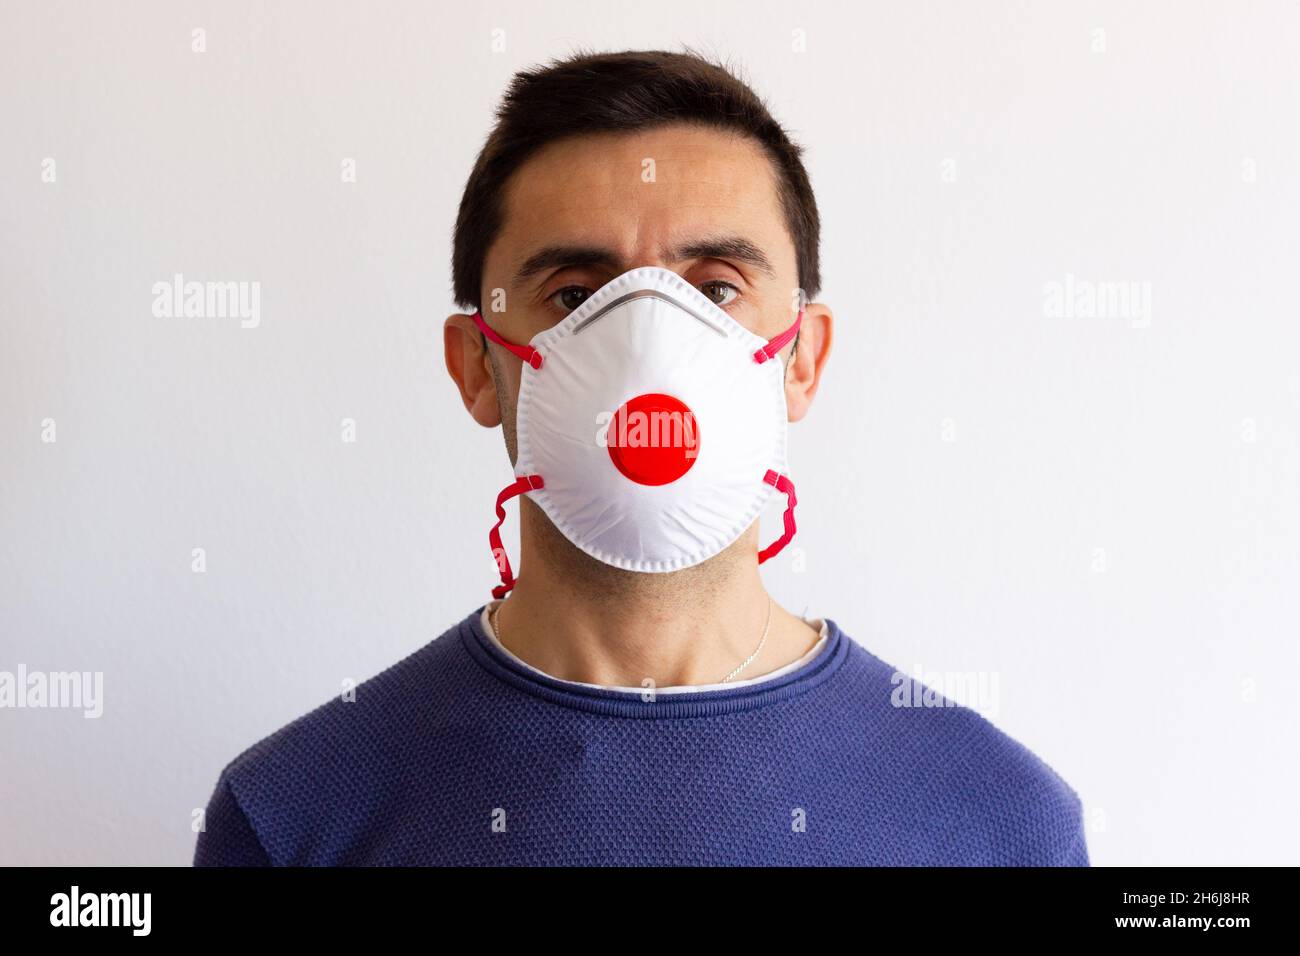 Portrait of young man wearing face mask with red cap in the middle. Patient with air breathing protection equipment. Pandemic, coronavirus concepts Stock Photo